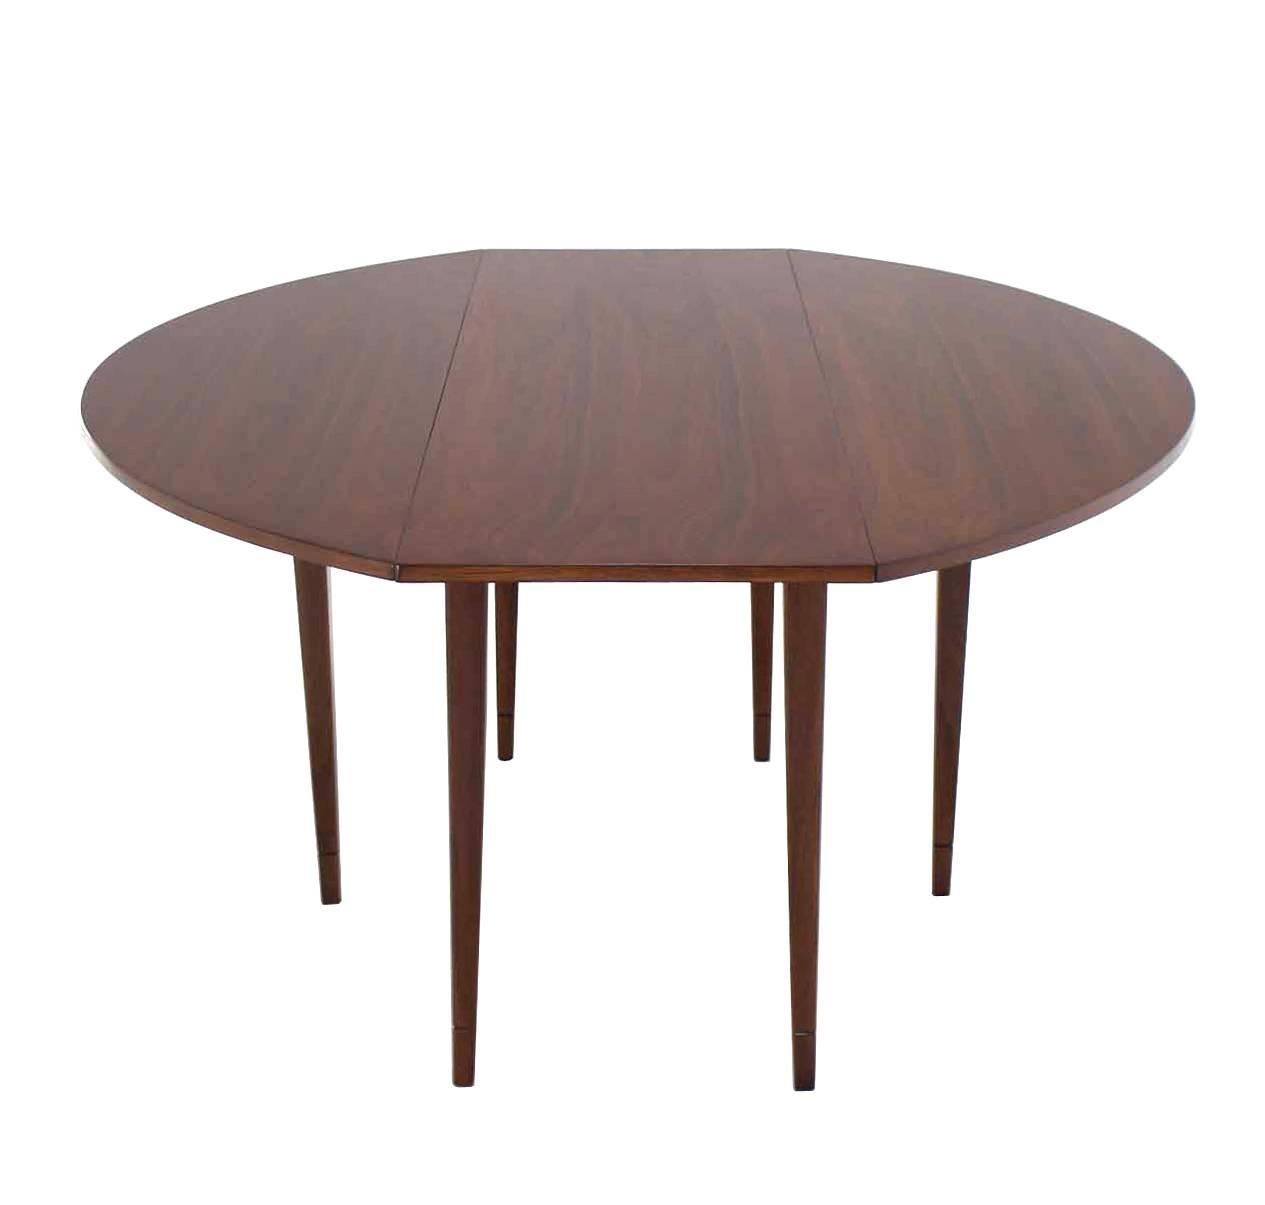 Lacquered Mid Century Modern Drop Leaf Oiled Walnut Dining Table